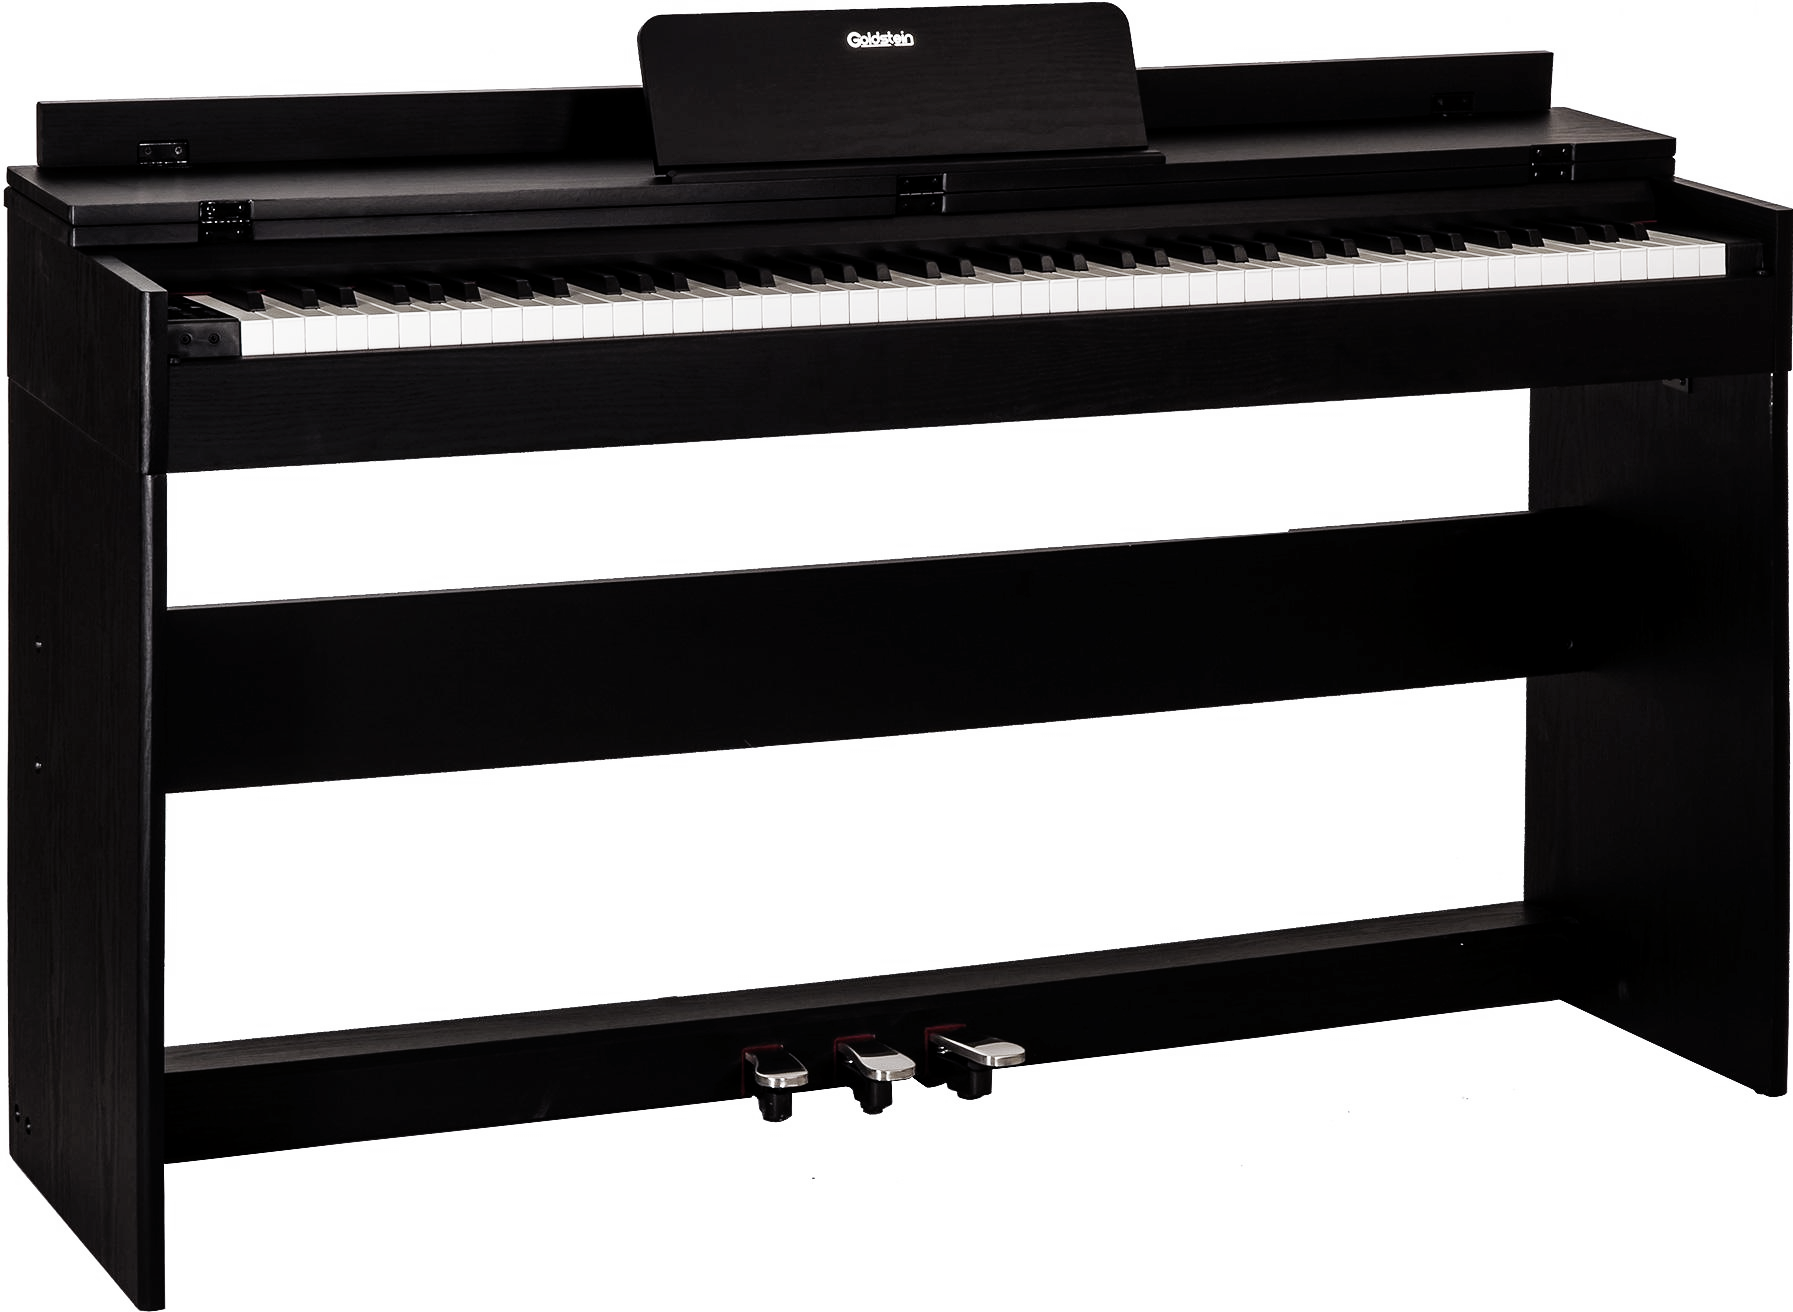 Goldstein Glp-8 - Noir - Digital piano with stand - Main picture